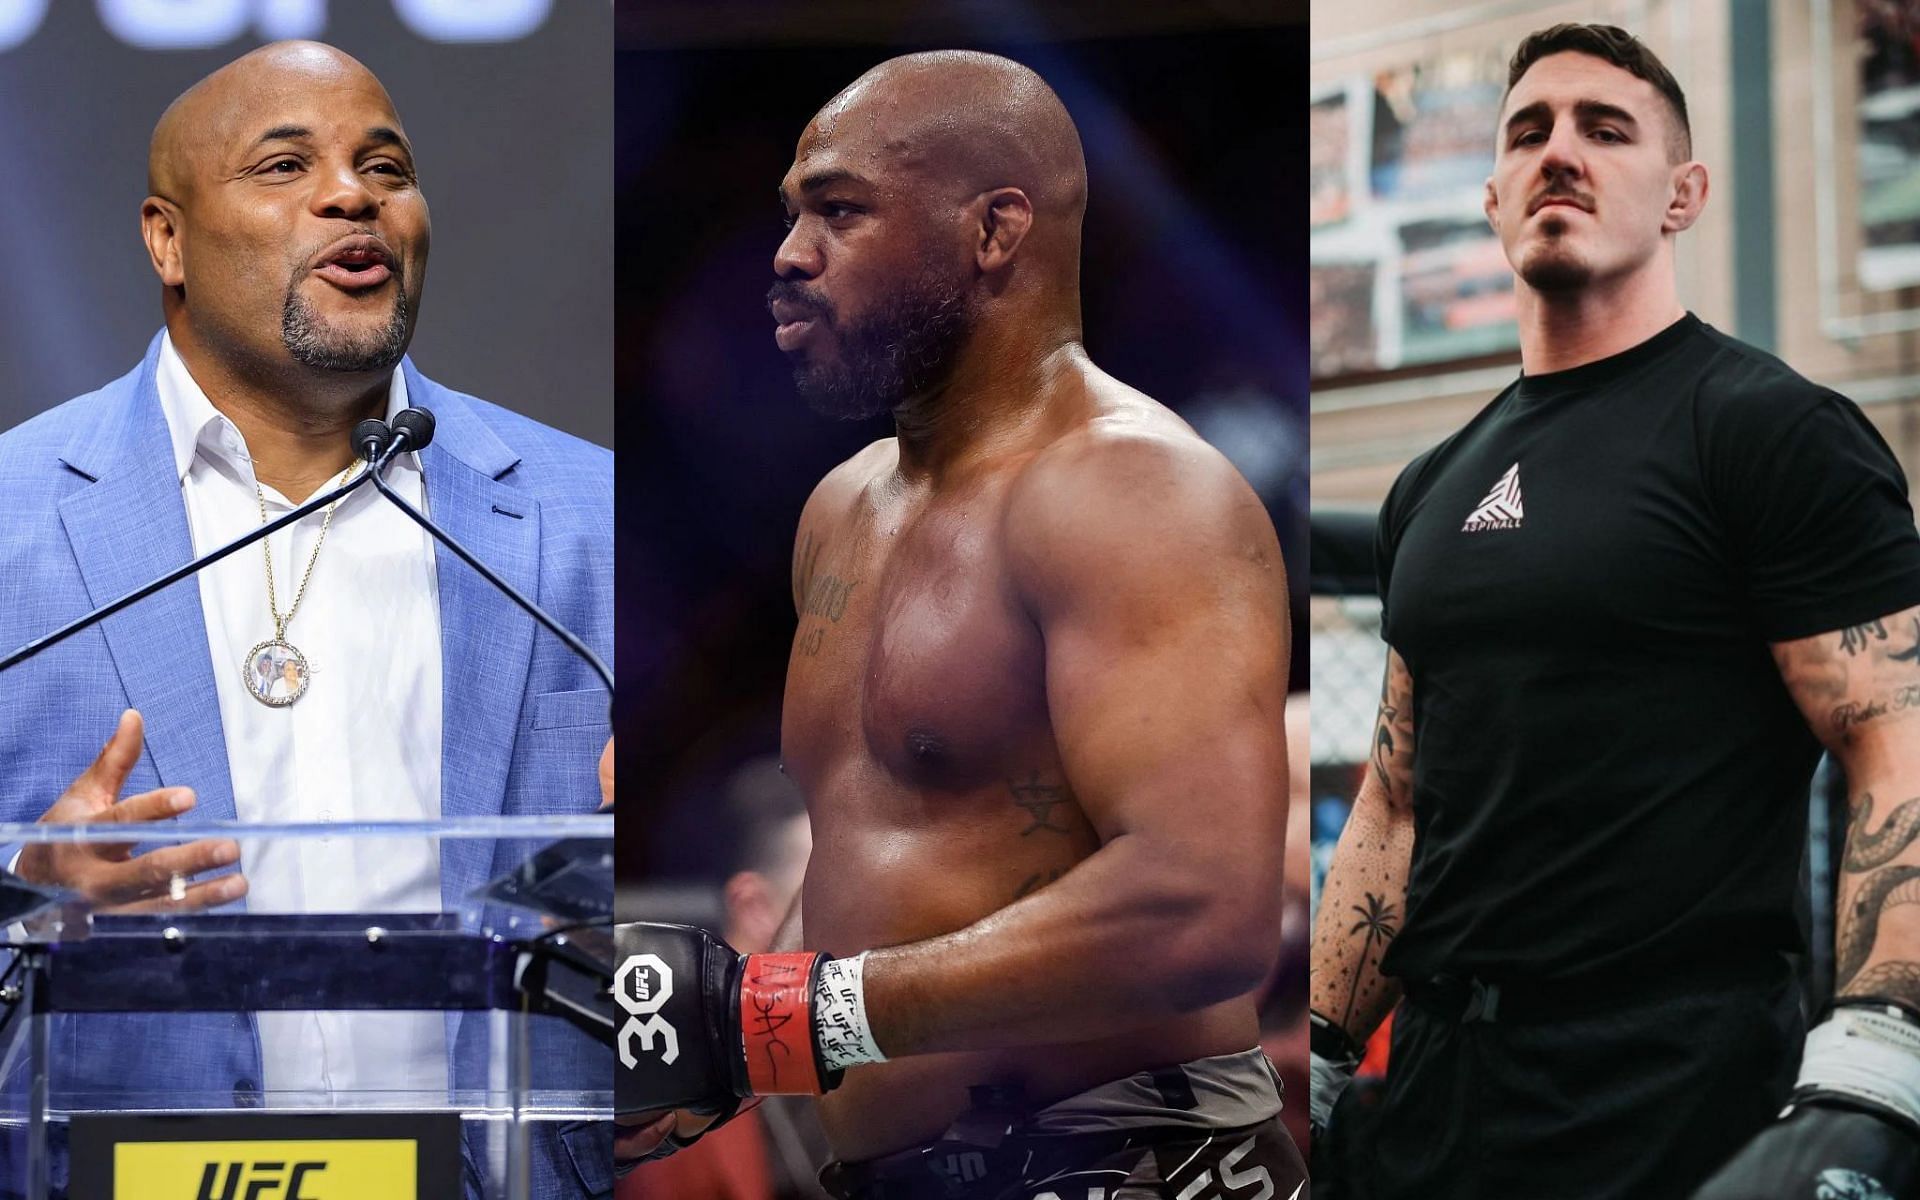 Daniel Cormier (left) believes Jon Jones (middle) may lose his &quot;GOAT&quot; status if he loses to Tom Aspinall (right) [Images Courtesy: @GettyImages, @tomaspinallofficial on Instagram]